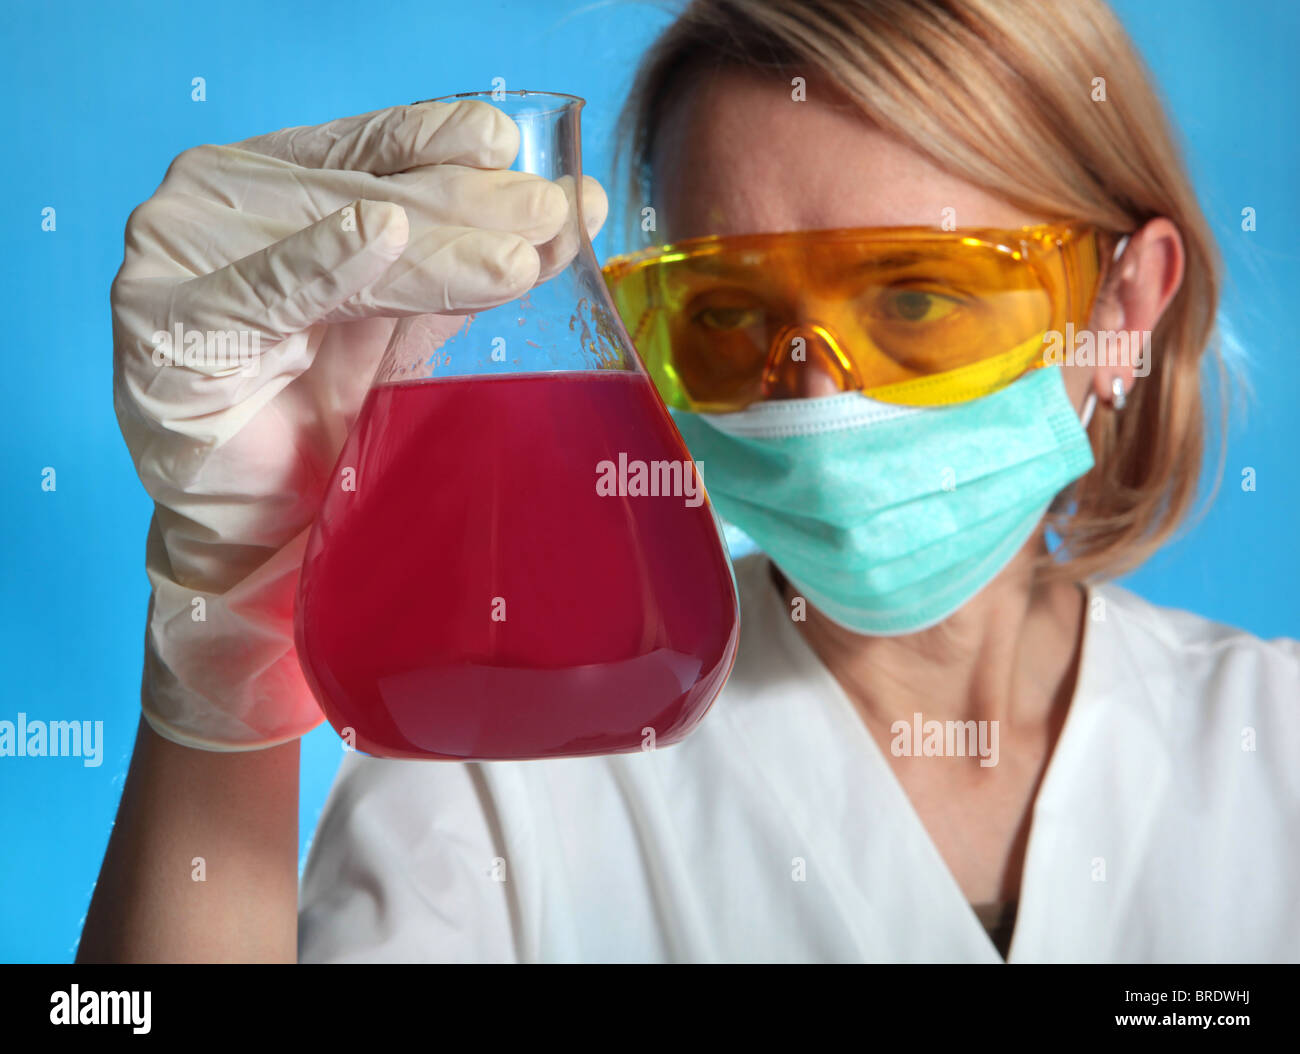 female researcher is analyzing a red liquid Stock Photo